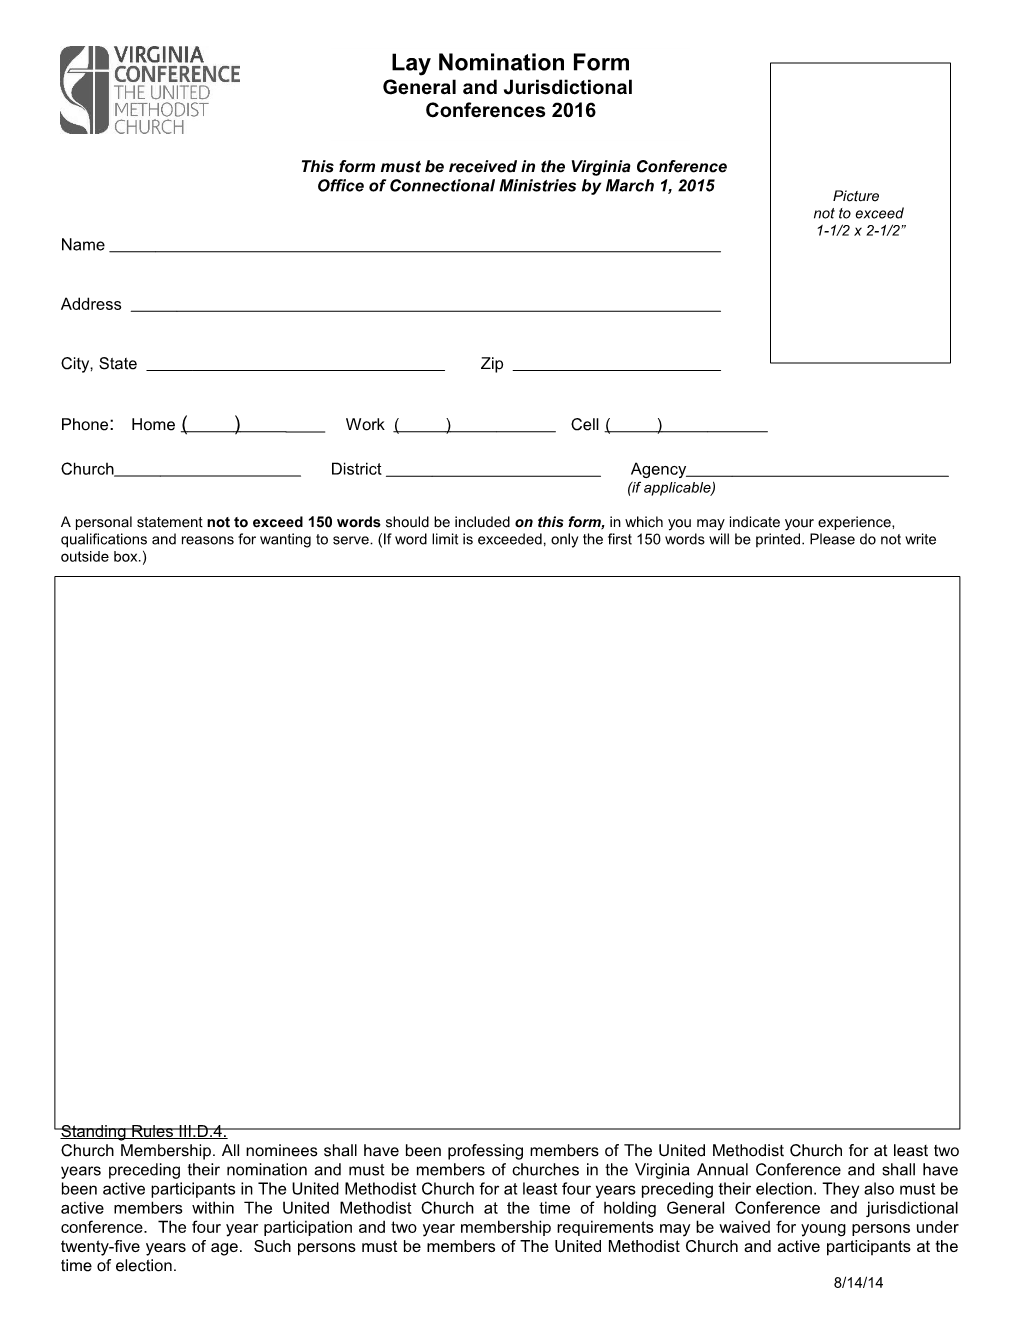 This Form Must Be Received in the Virginia Conference